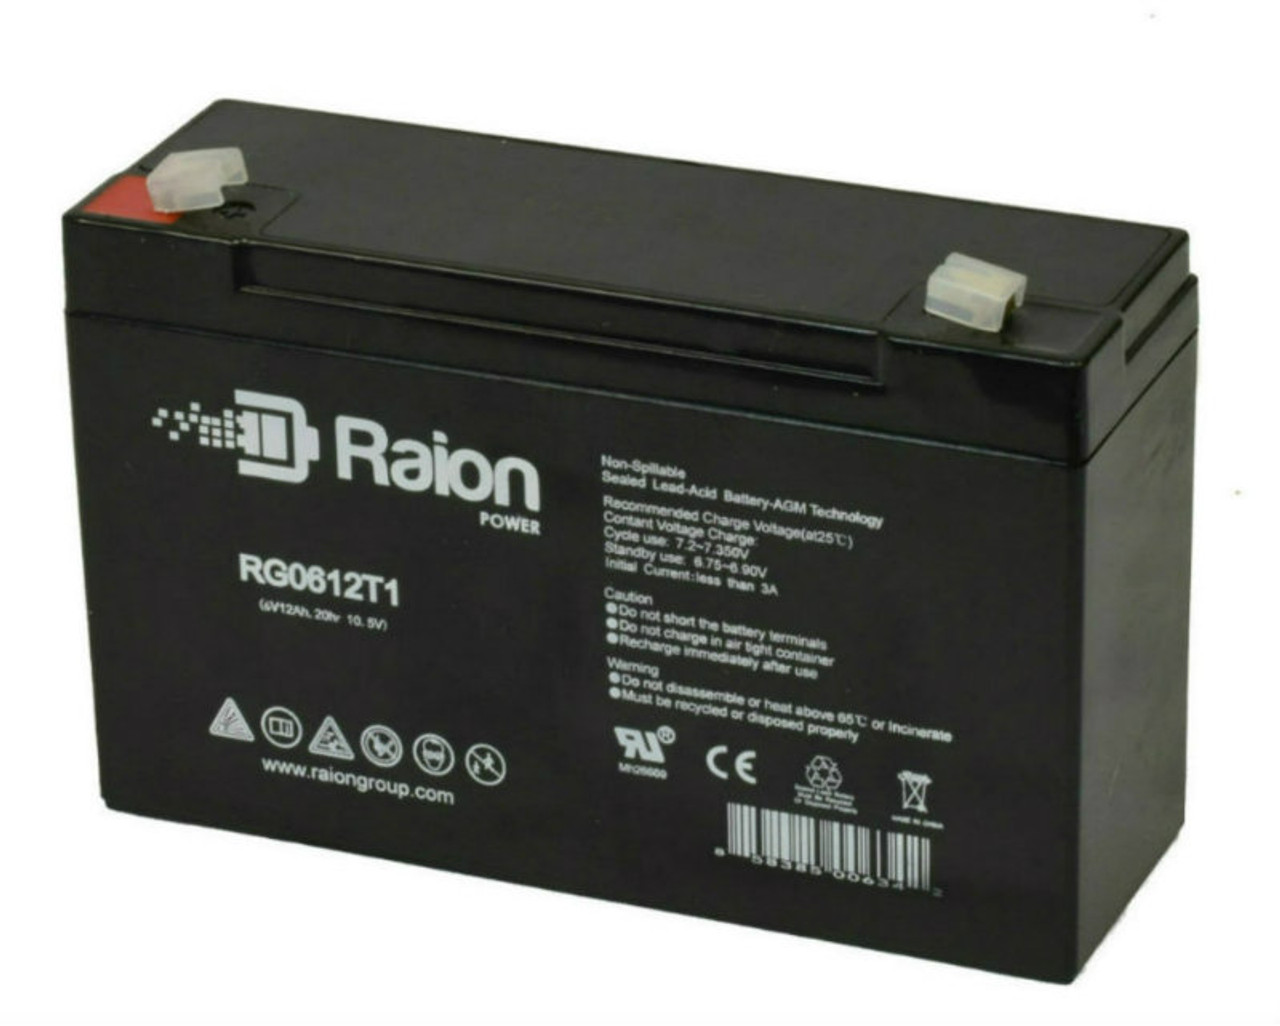 Raion Power RG06120T1 Replacement 6V 12Ah Emergency Light Battery for Sure-Lites 12UMB410